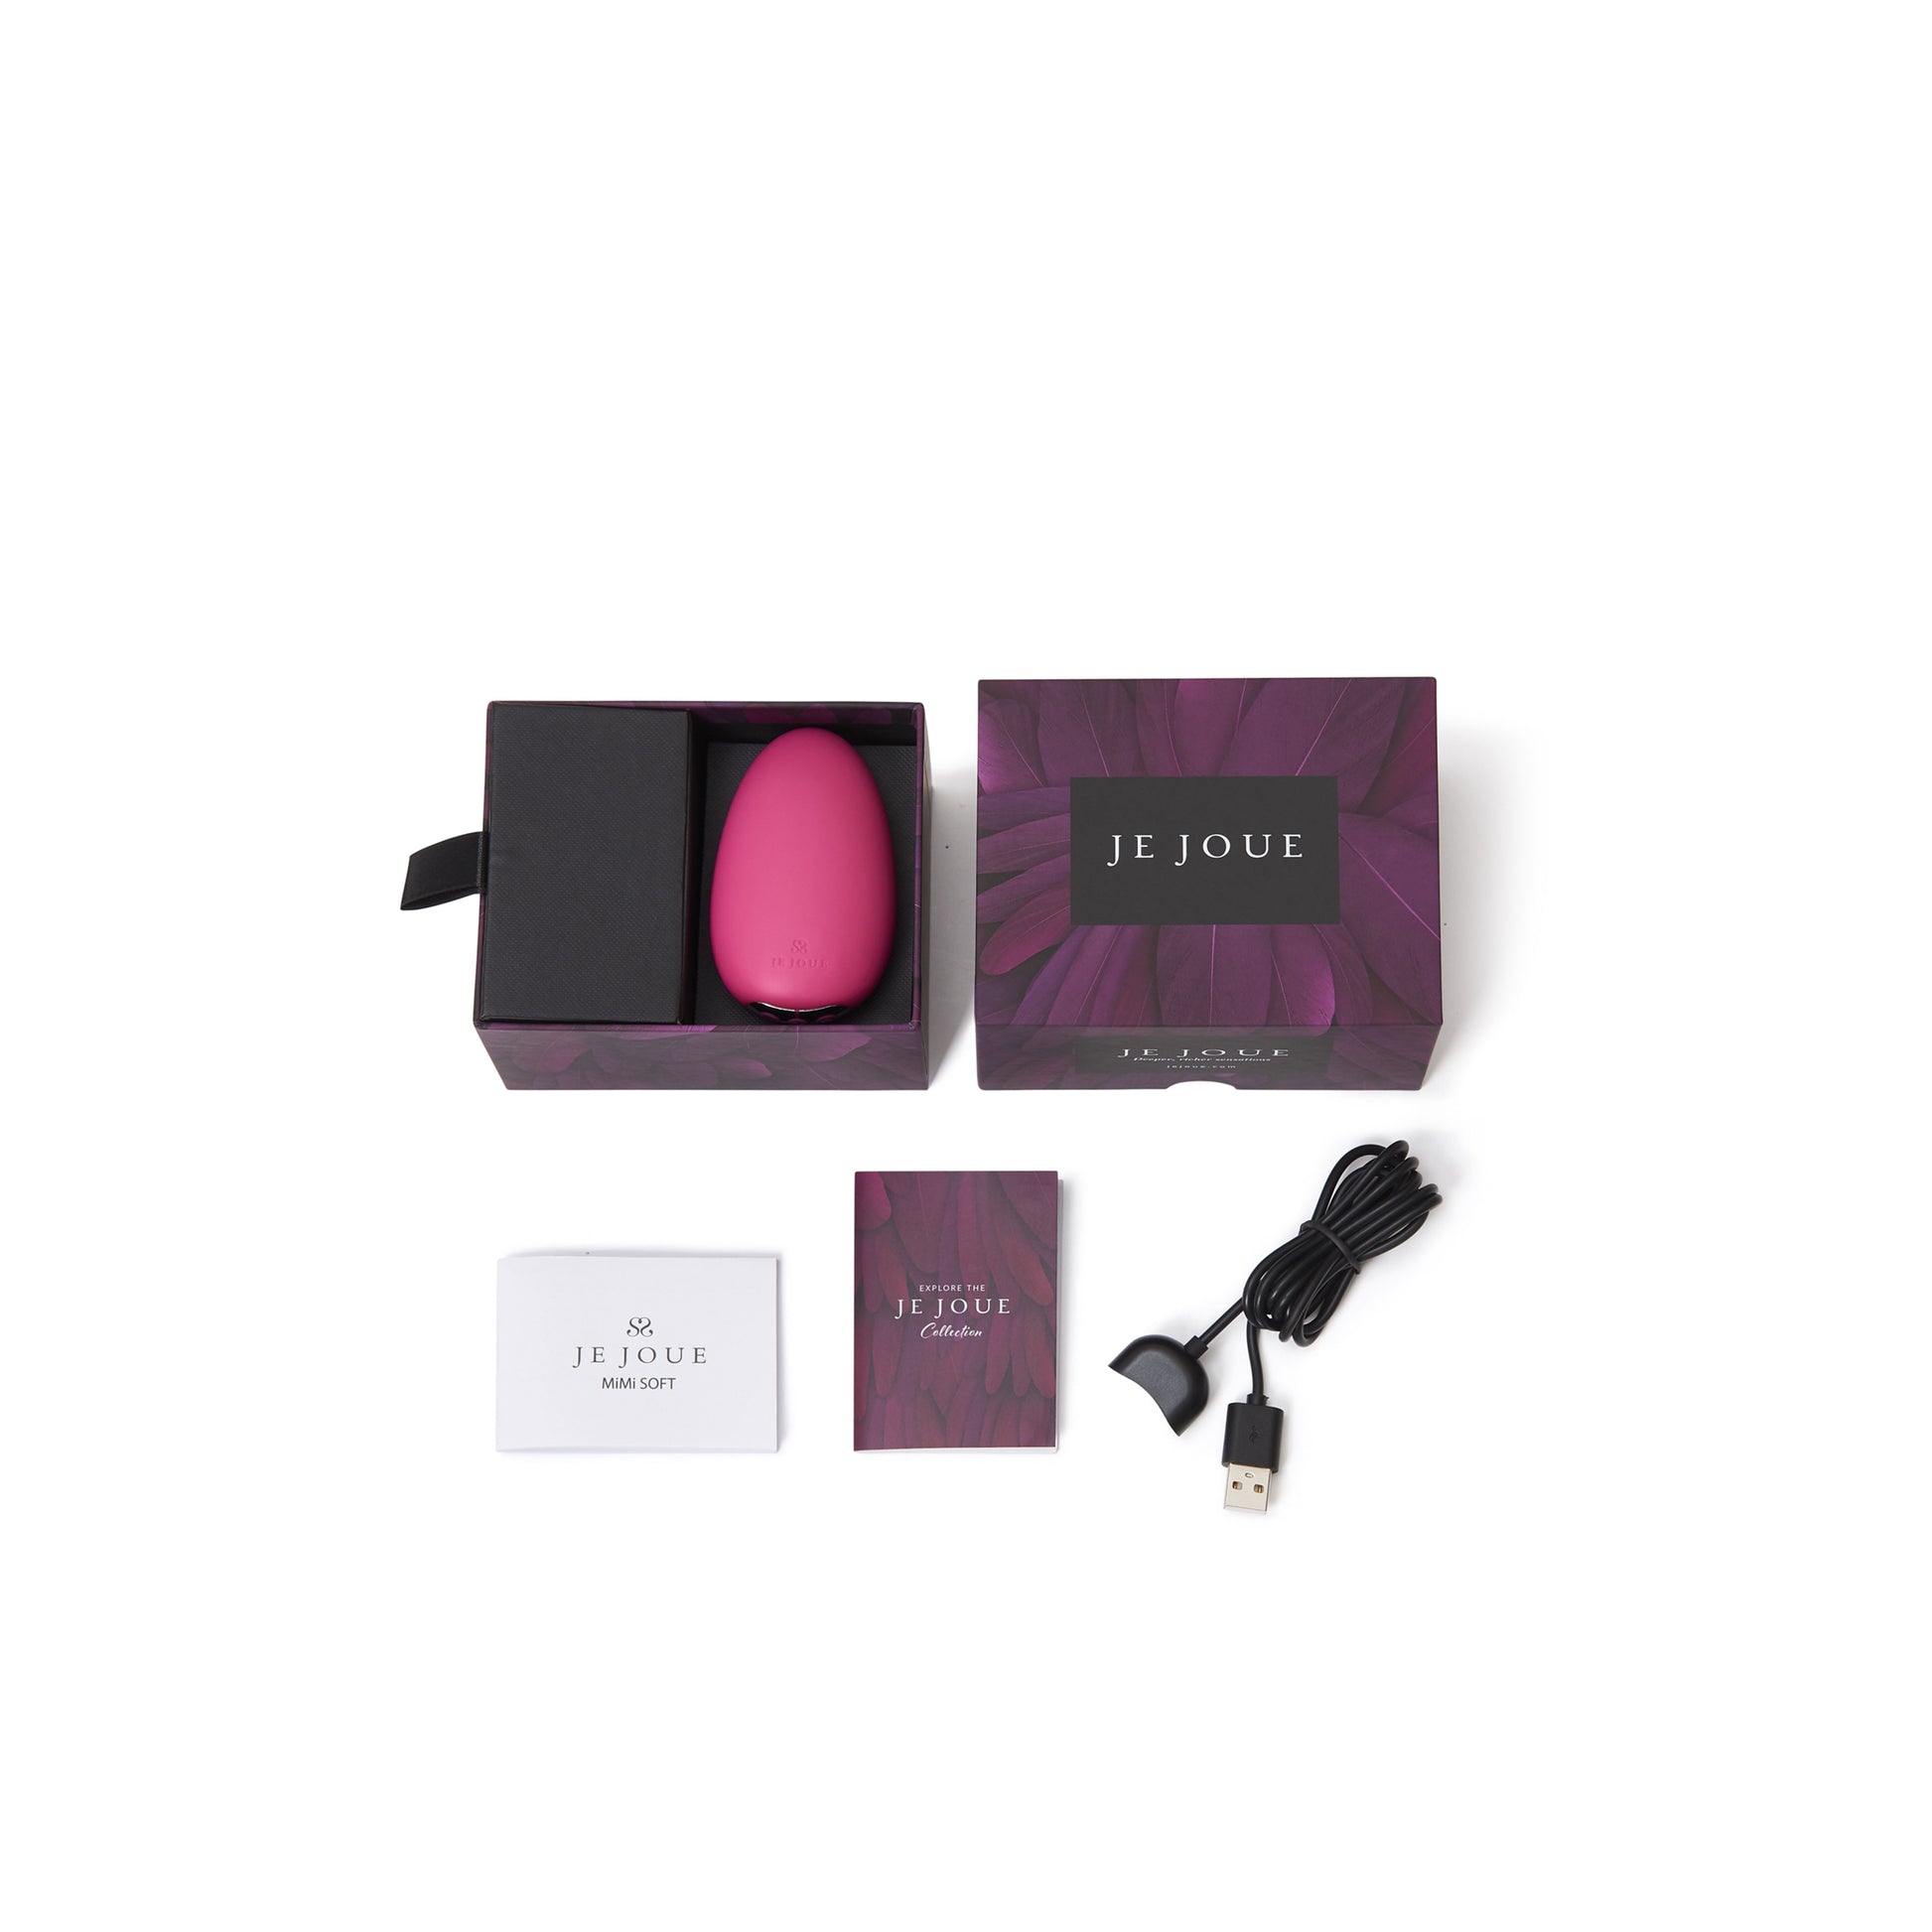 Pink Mimi Vibrator in box with accessories 